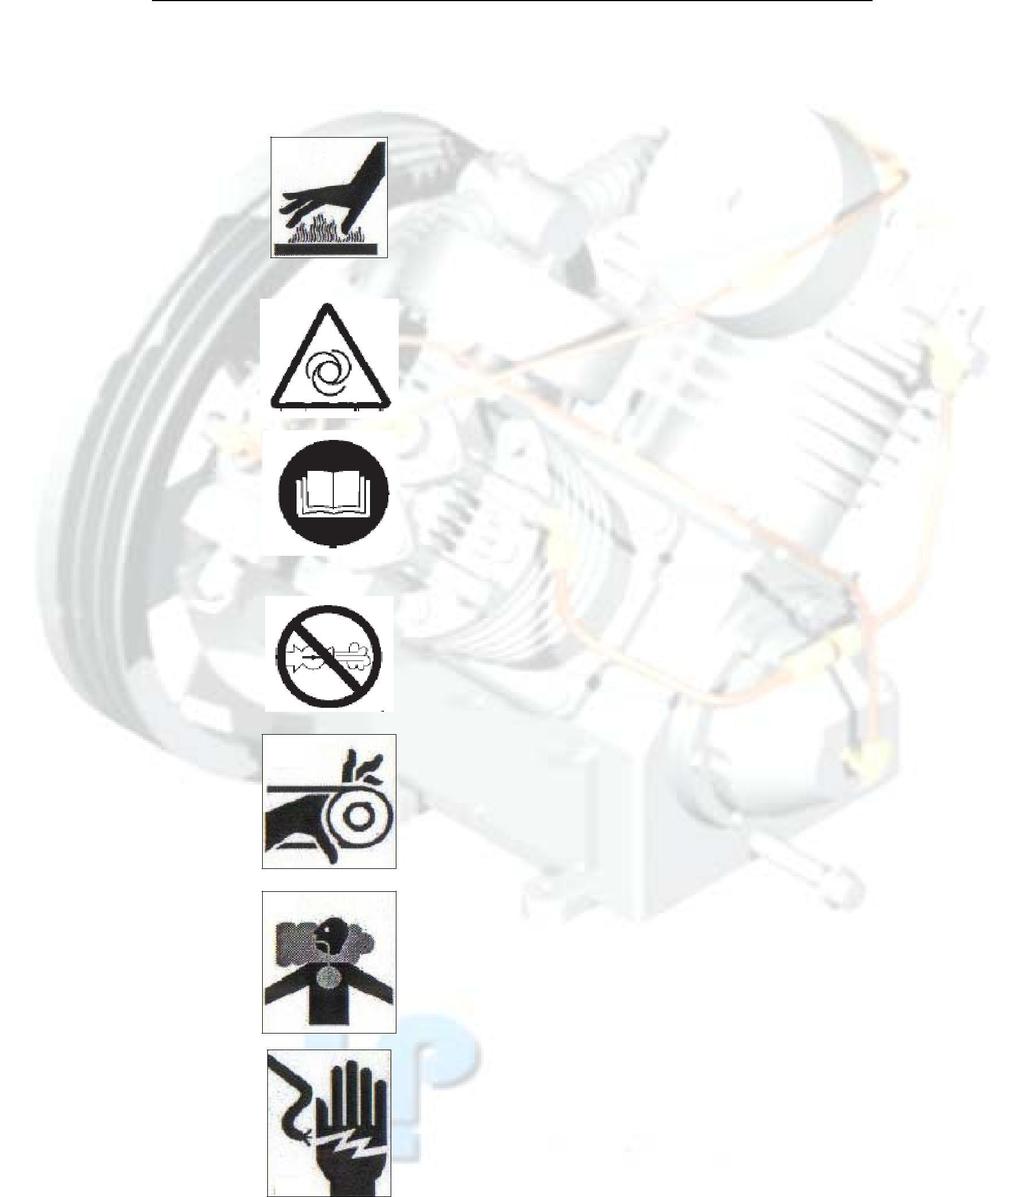 Section I Symbols on the compressor Warning: Hot surfaces: Do not touch! Warning: The unit is operated by remote control, and might start without warning.